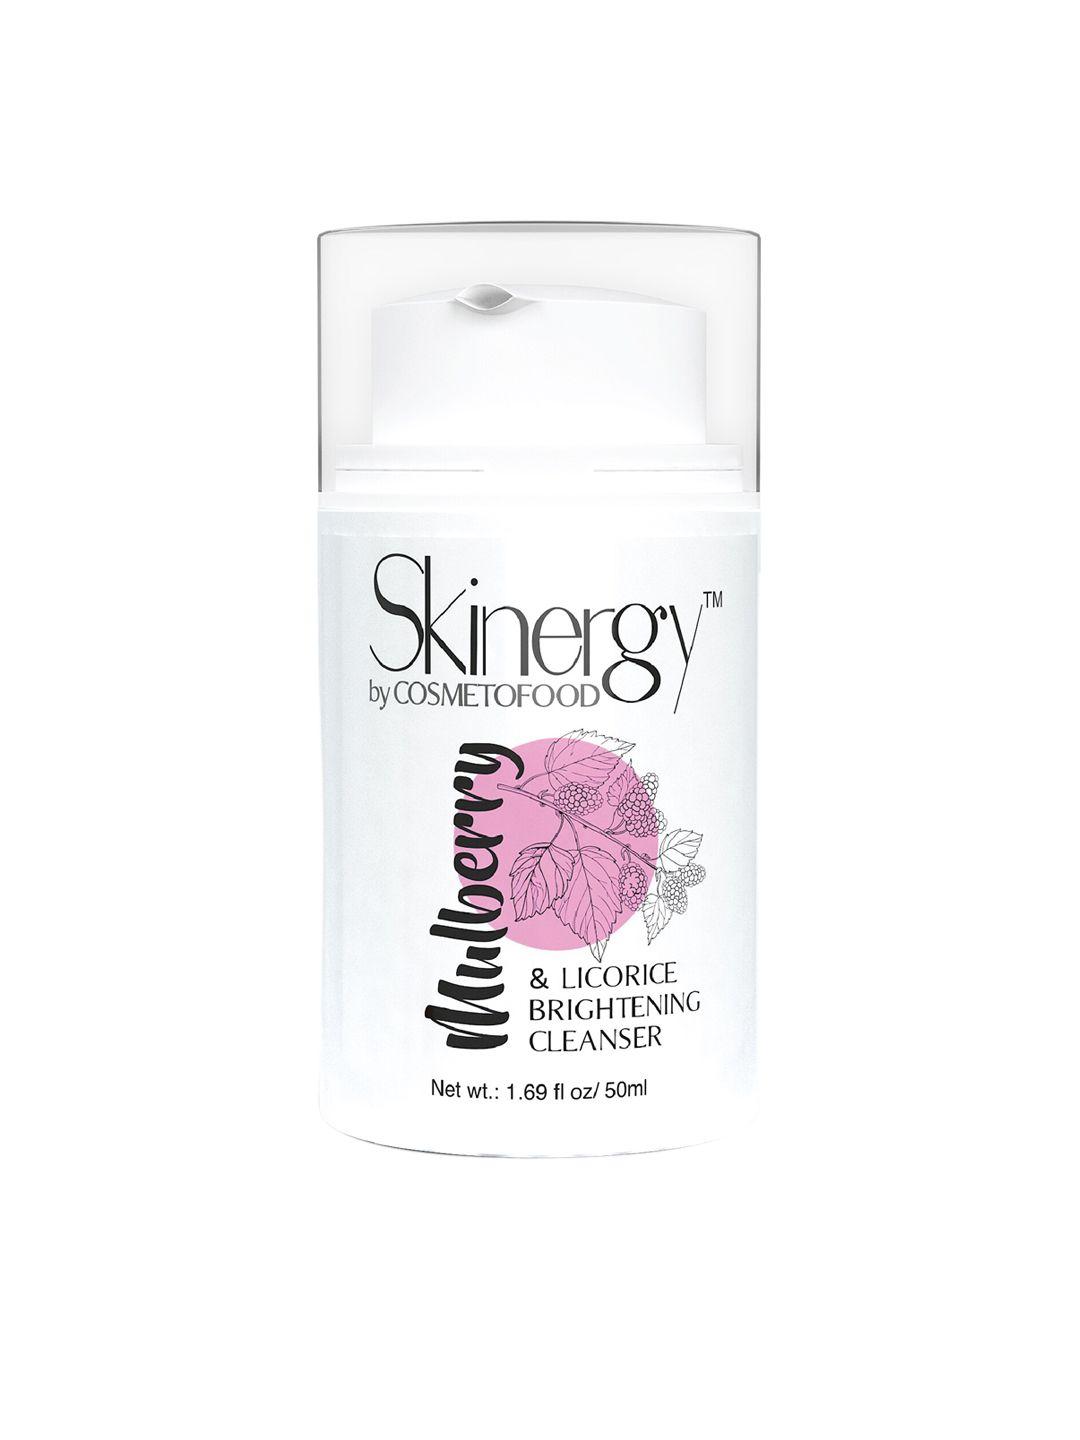 cosmetofood skinergy mulberry & licorice brightening face cleanser 50 ml